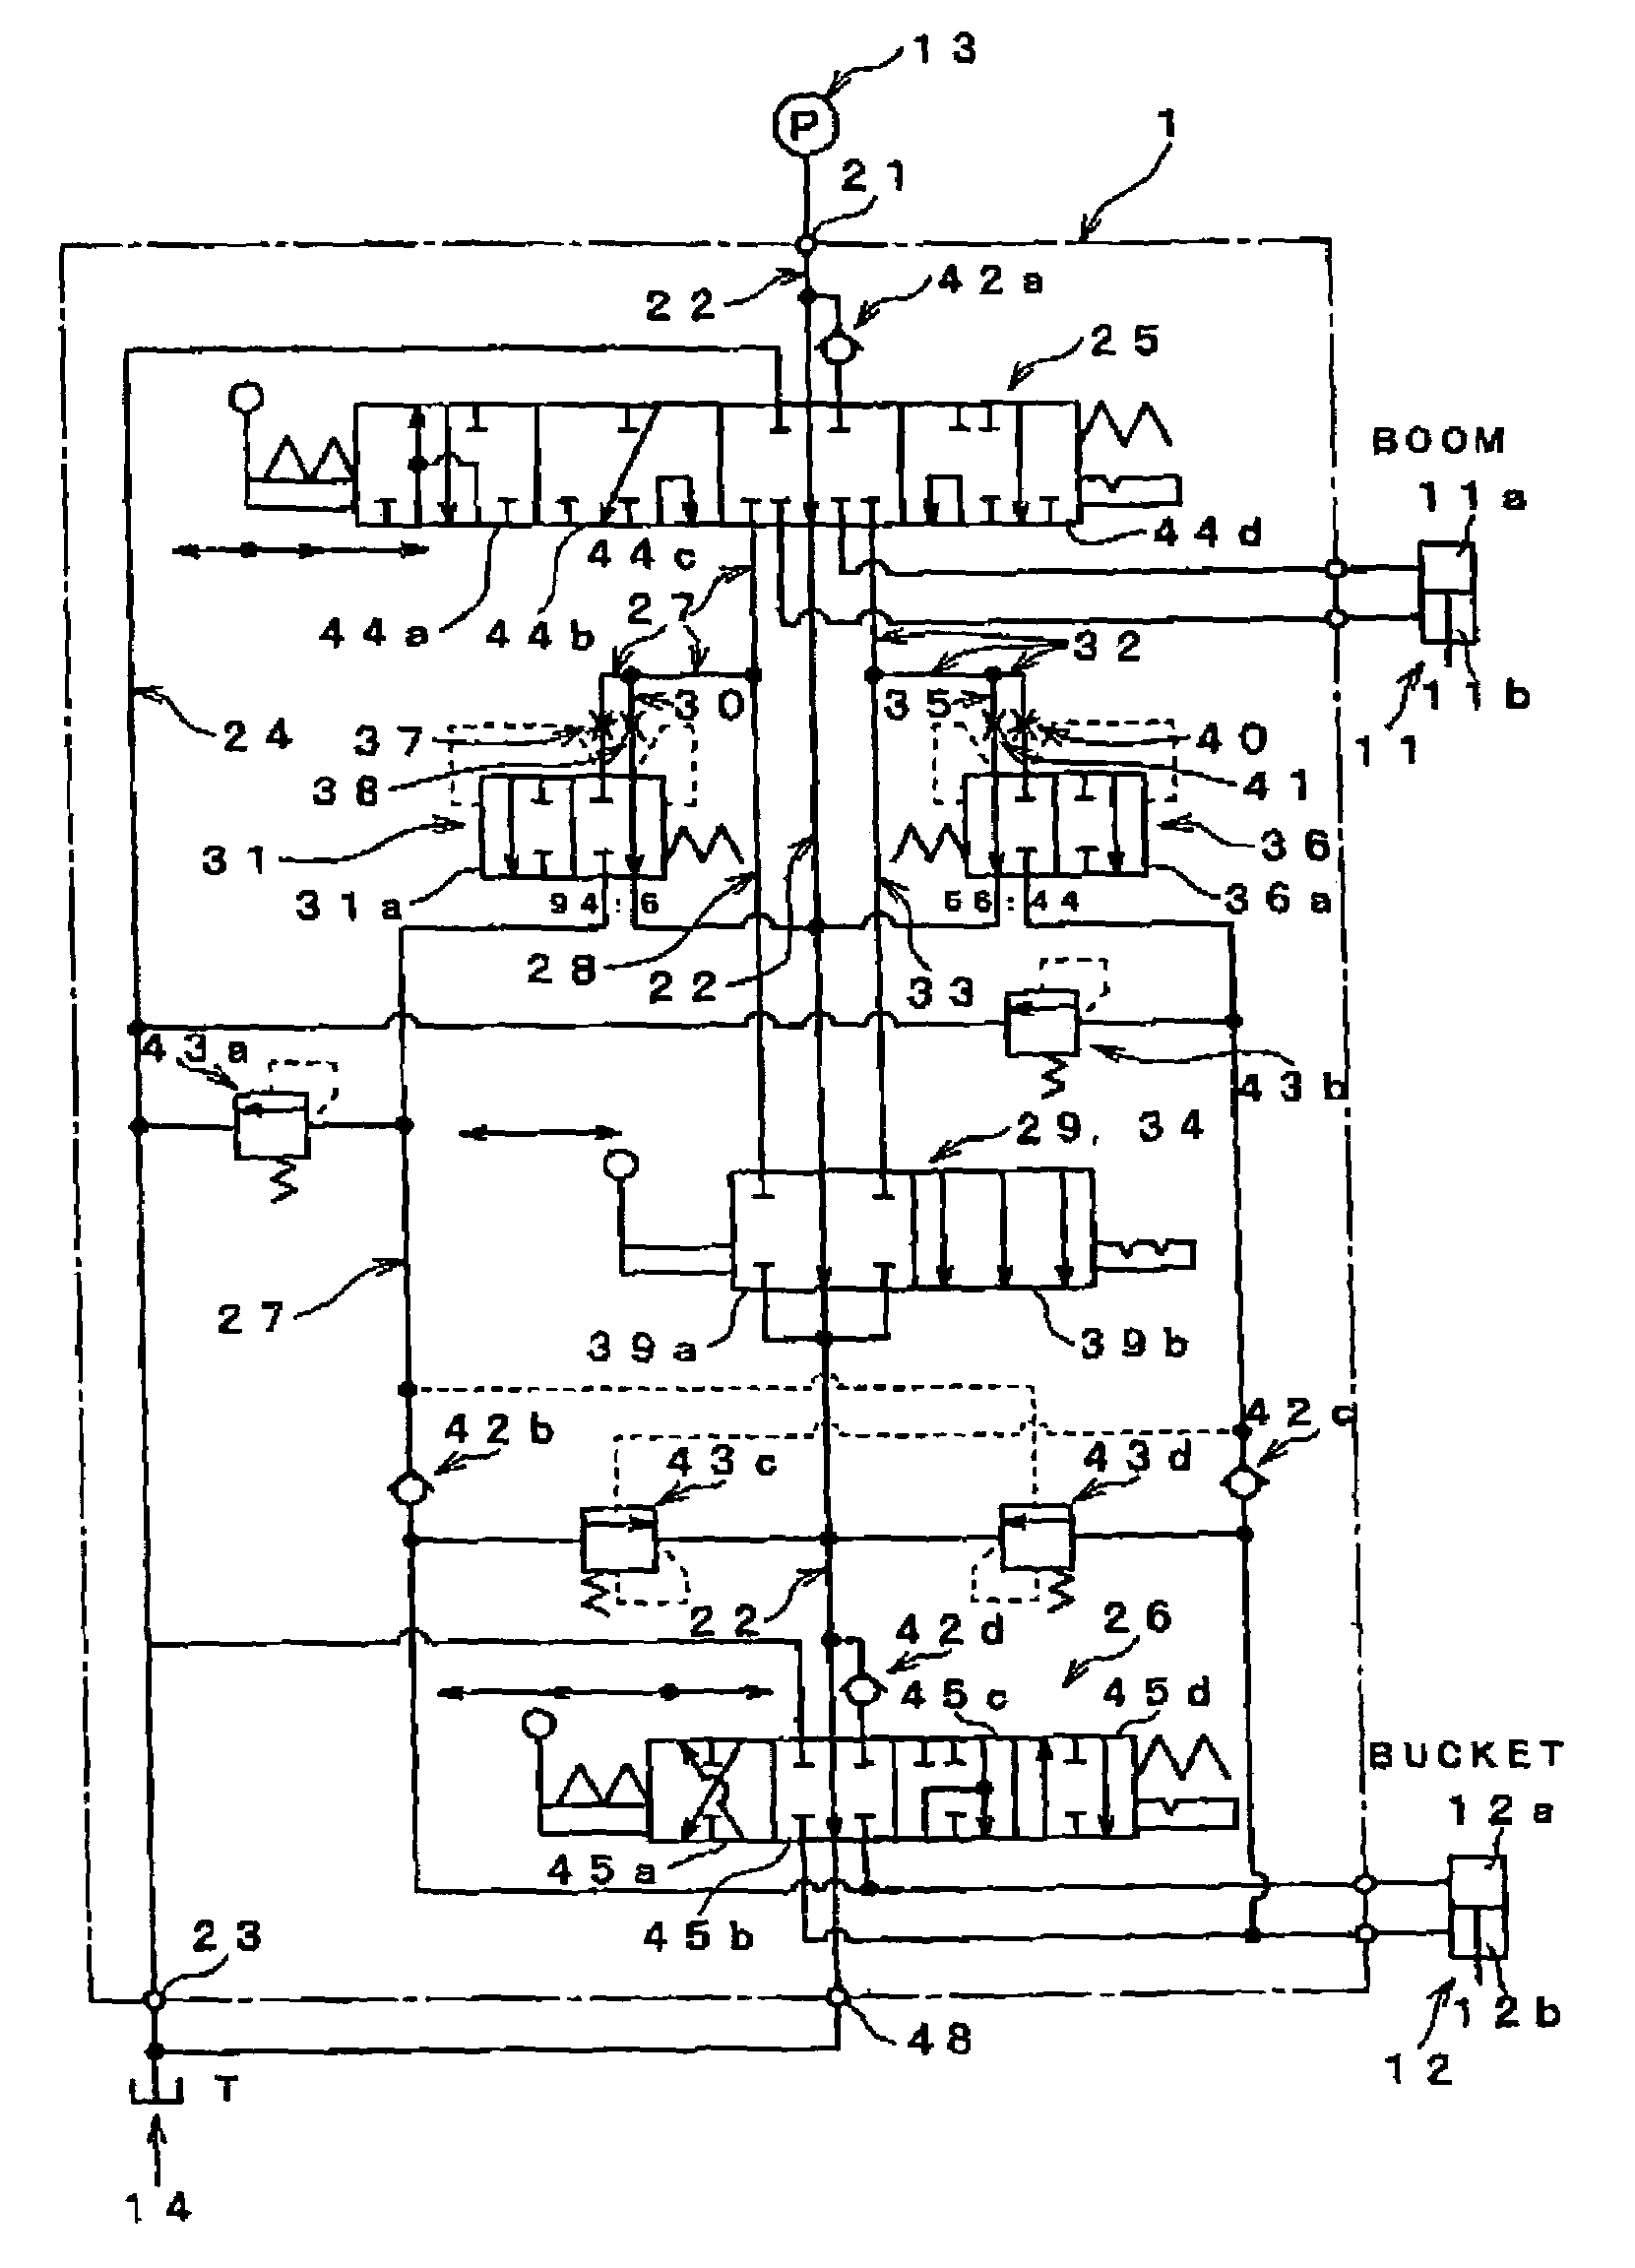 Multiple-directional switching valve